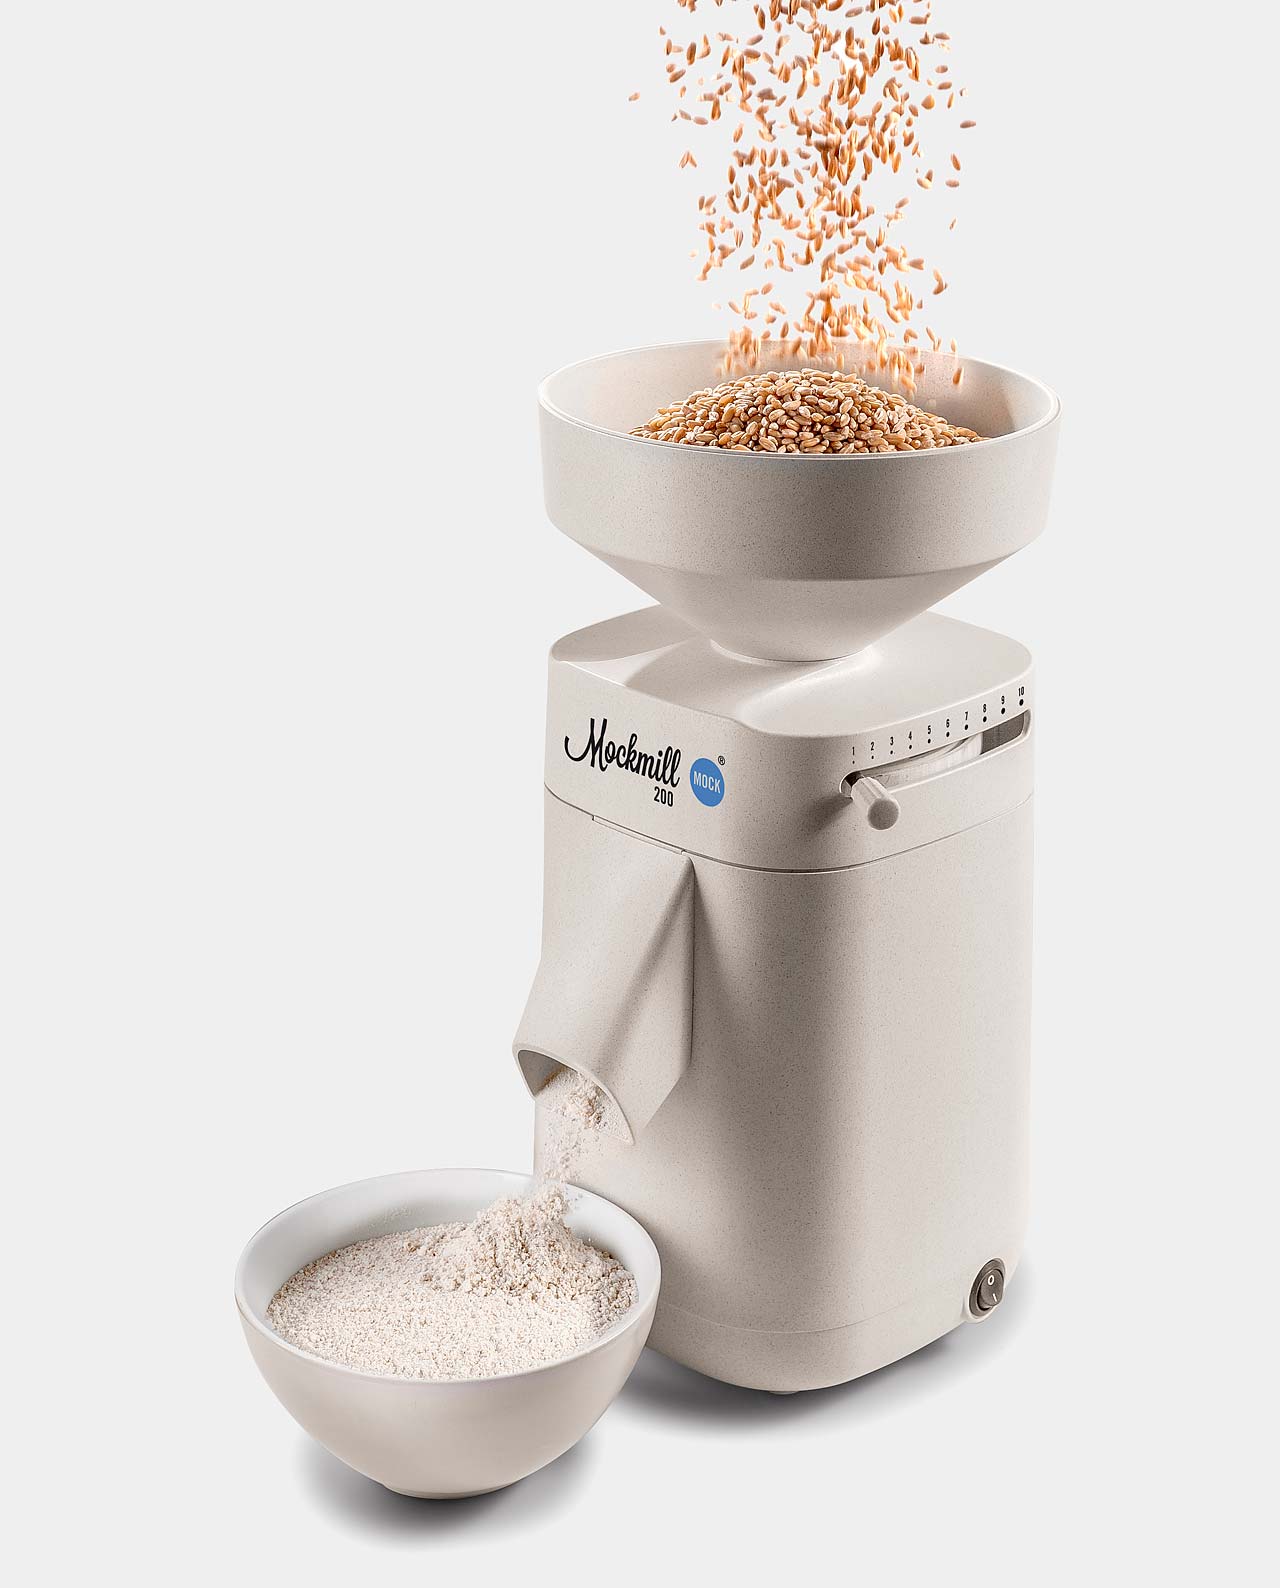 Mockmill Review: Is it Really the Best Grain Mill on the Market?